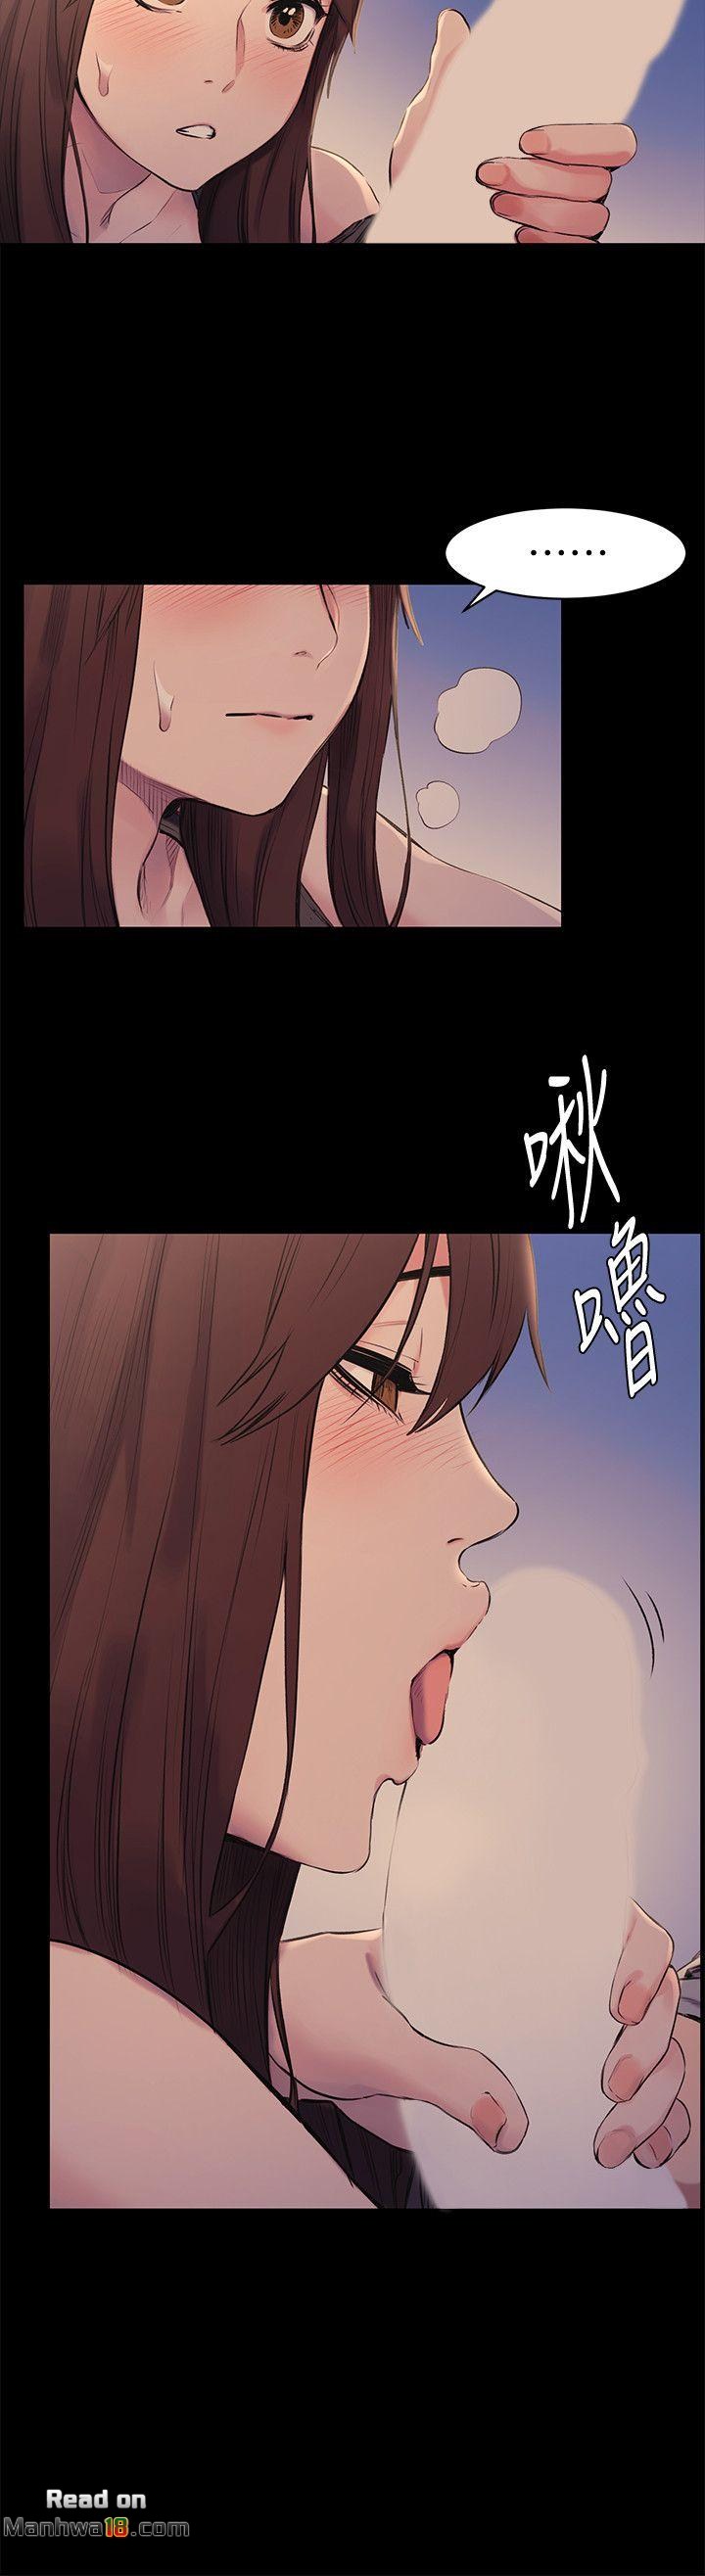 My Kingdom (Silent War) Raw - Chapter 48 Page 5